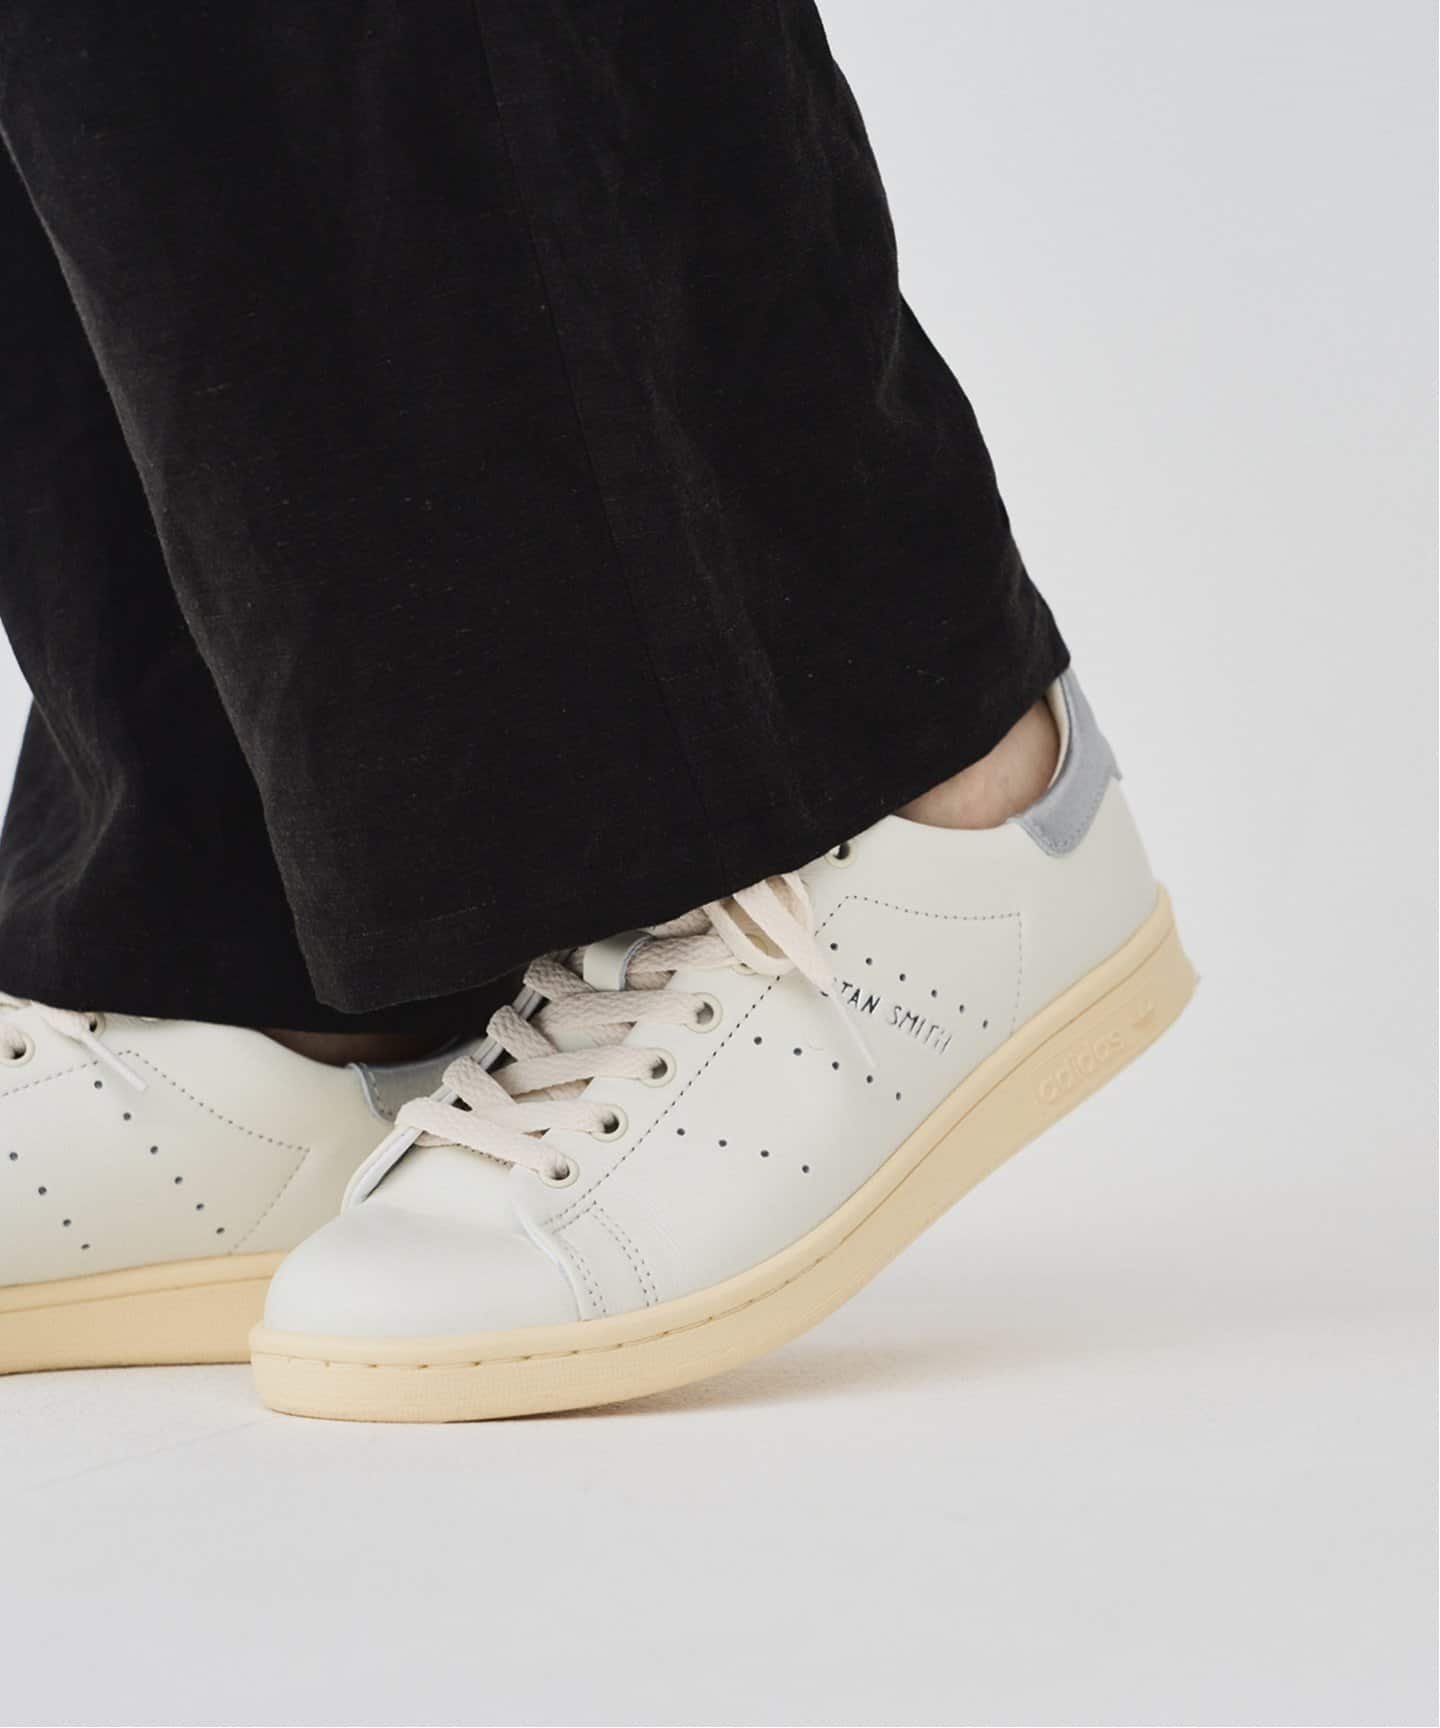 IENA adidas Originals for EDIFICE/IENA 別注 STANSMITH LUX Exclusiveモデル イエナ シューズ 靴 スニーカー ブラウン【送料無料】